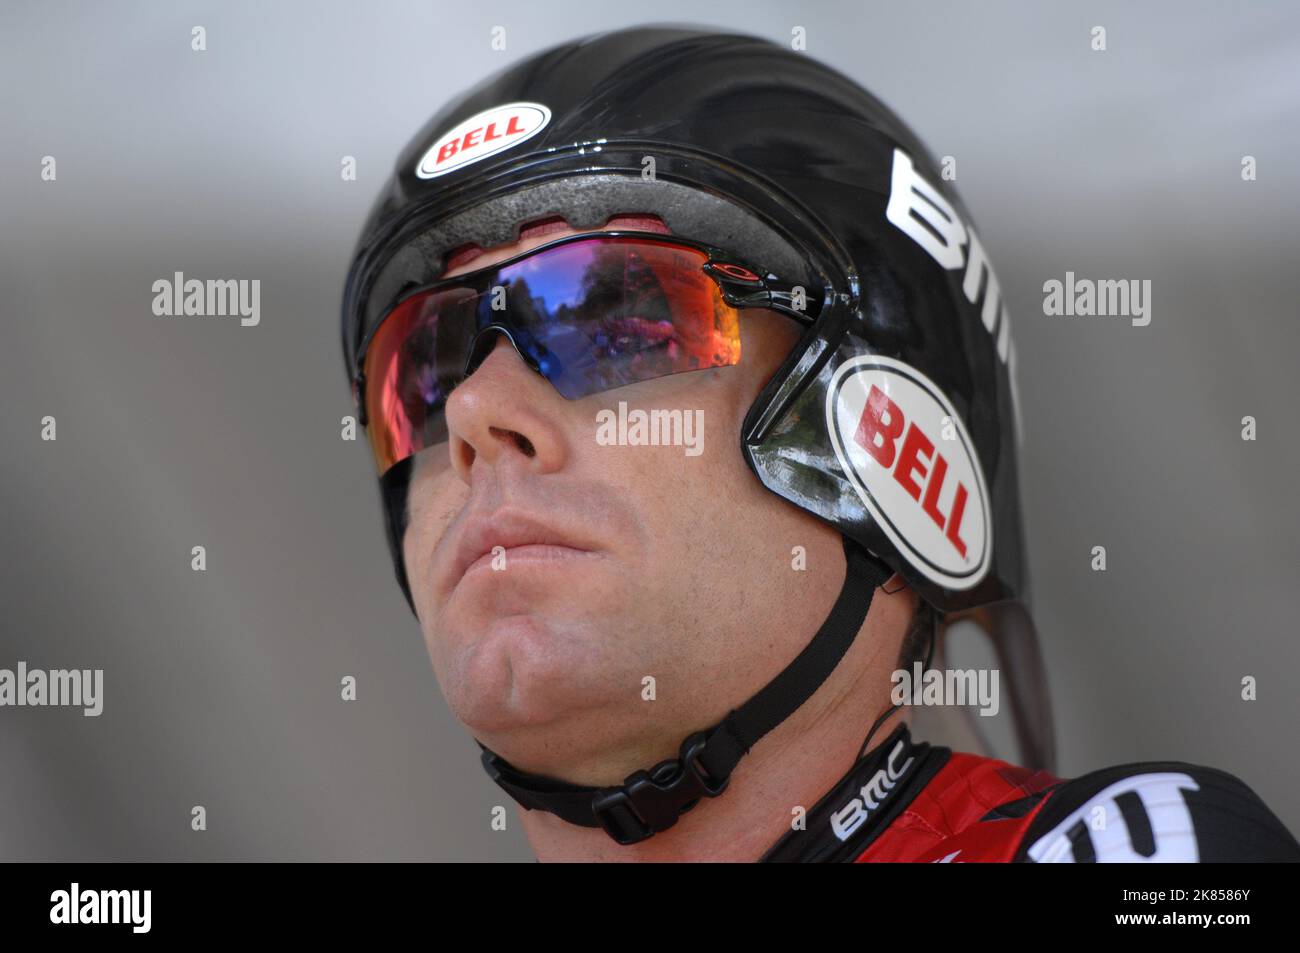 BMC Racing Team's Cadel Evans at the start of the individual time trial  Stock Photo